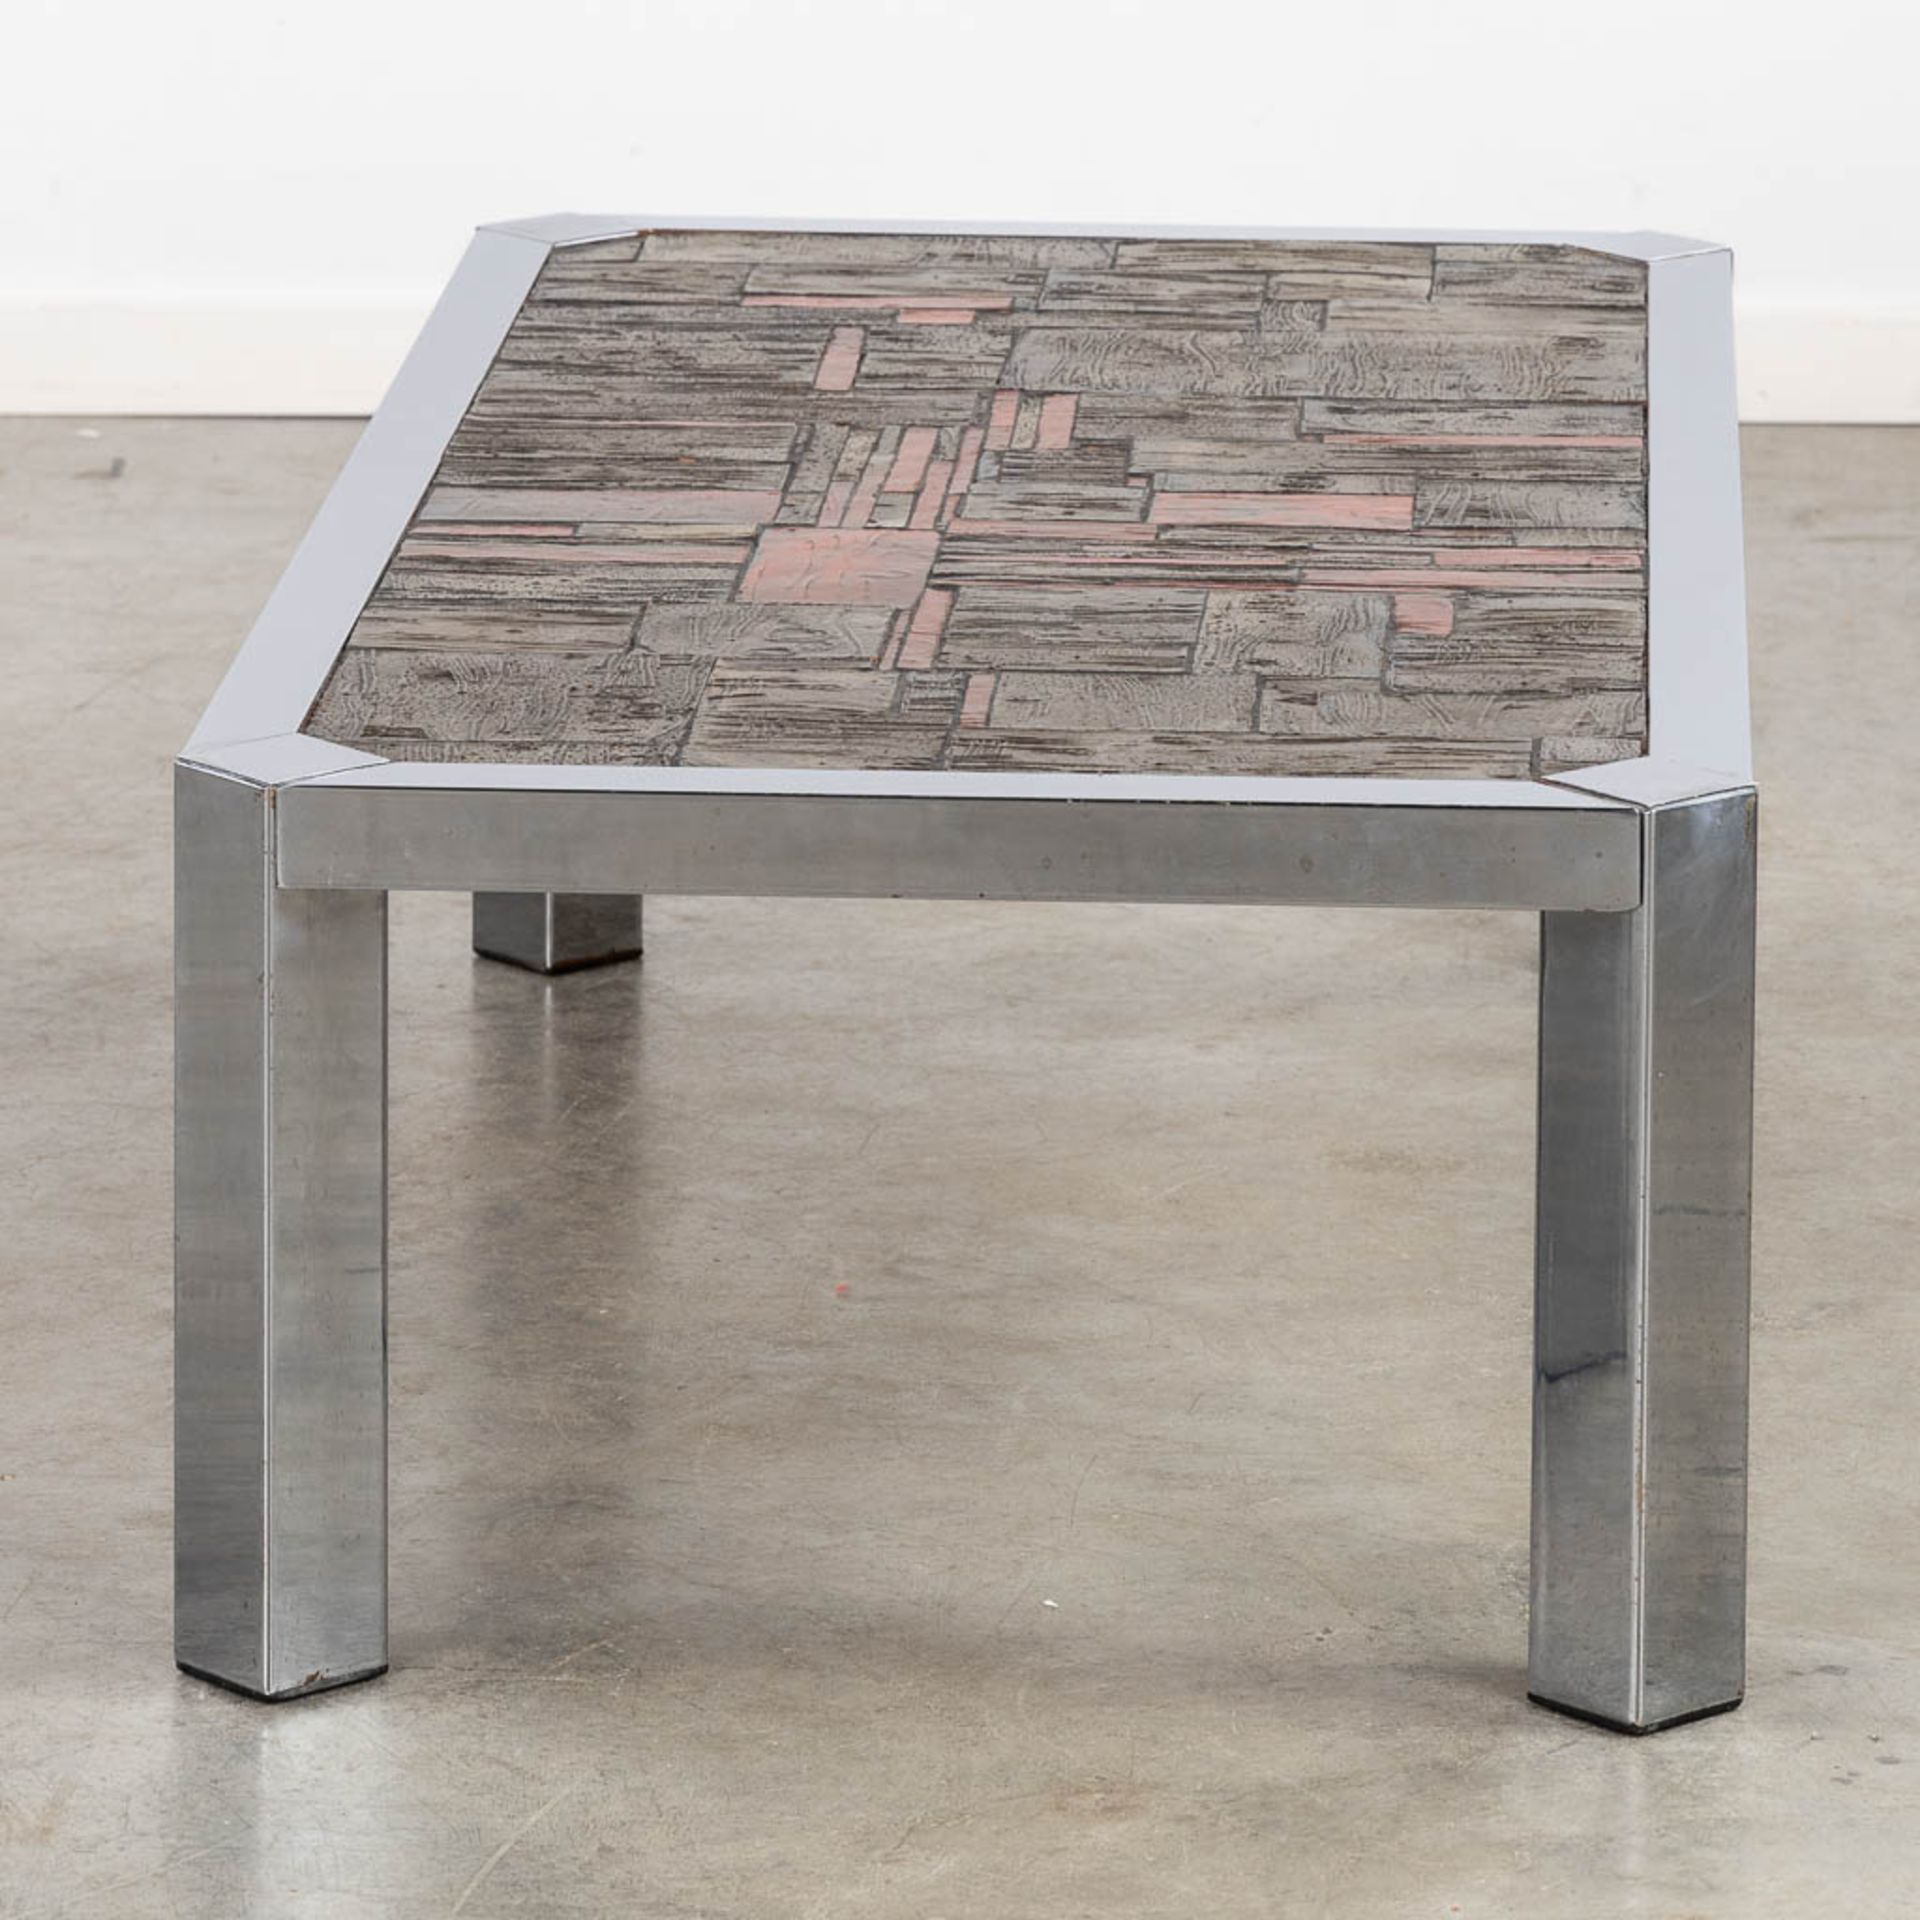 A mid-century coffee table with a ceramic tile top, circa 1960. (L:60 x W:120 x H:36 cm) - Image 6 of 10